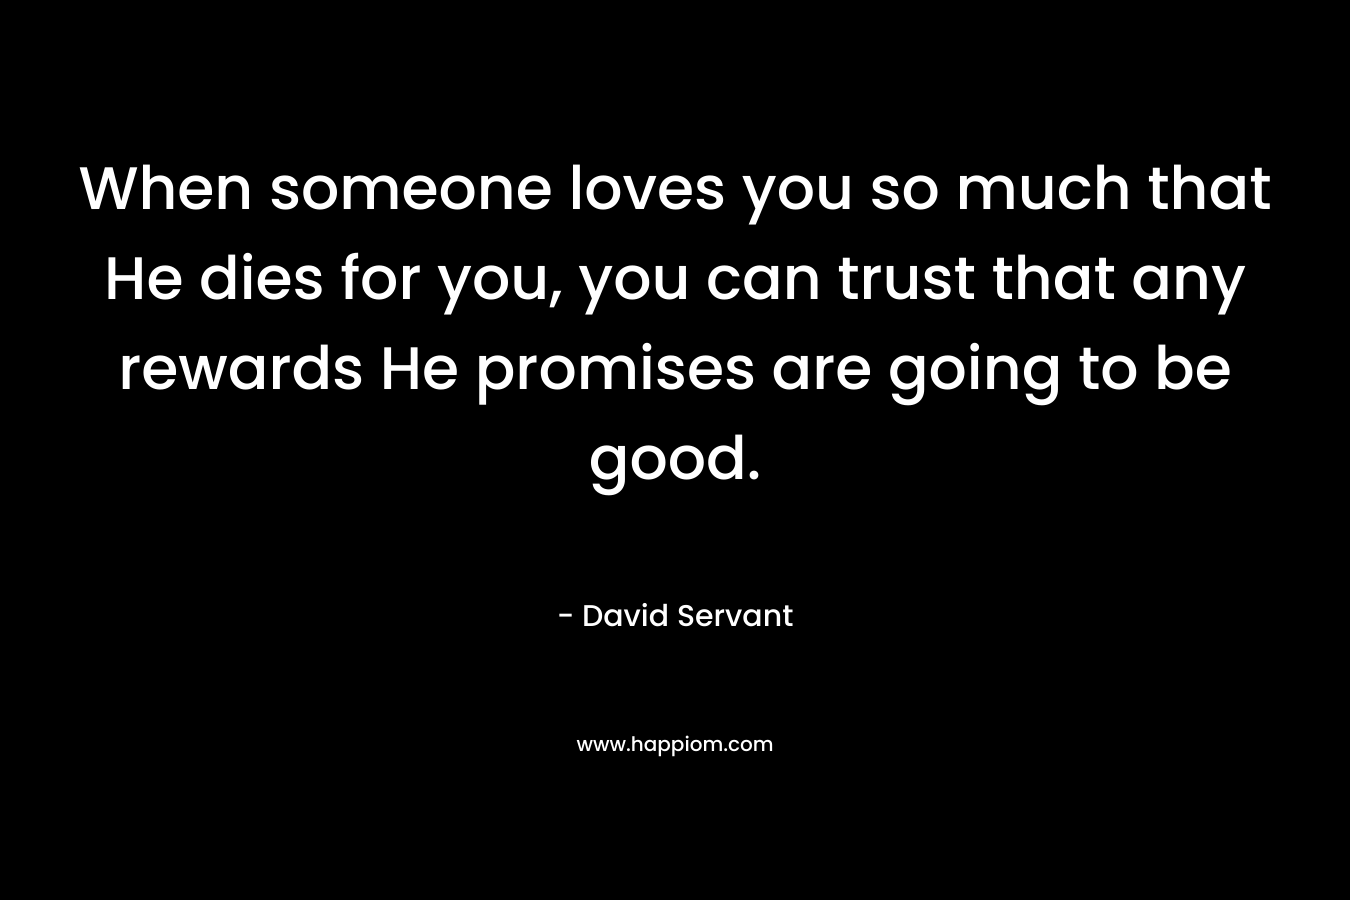 When someone loves you so much that He dies for you, you can trust that any rewards He promises are going to be good.